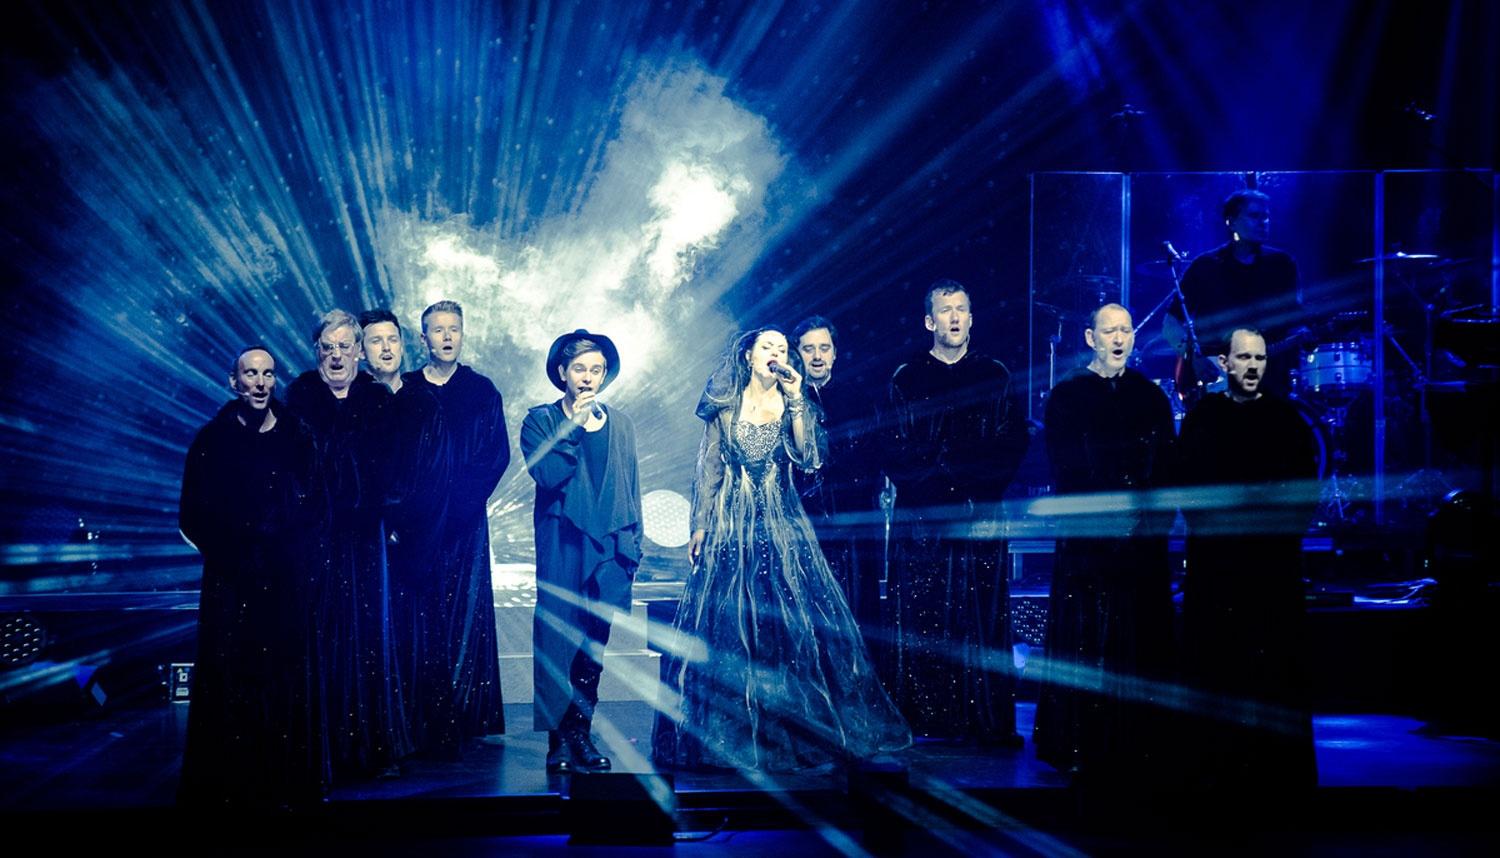 Performers on stage with blue lights, smoke